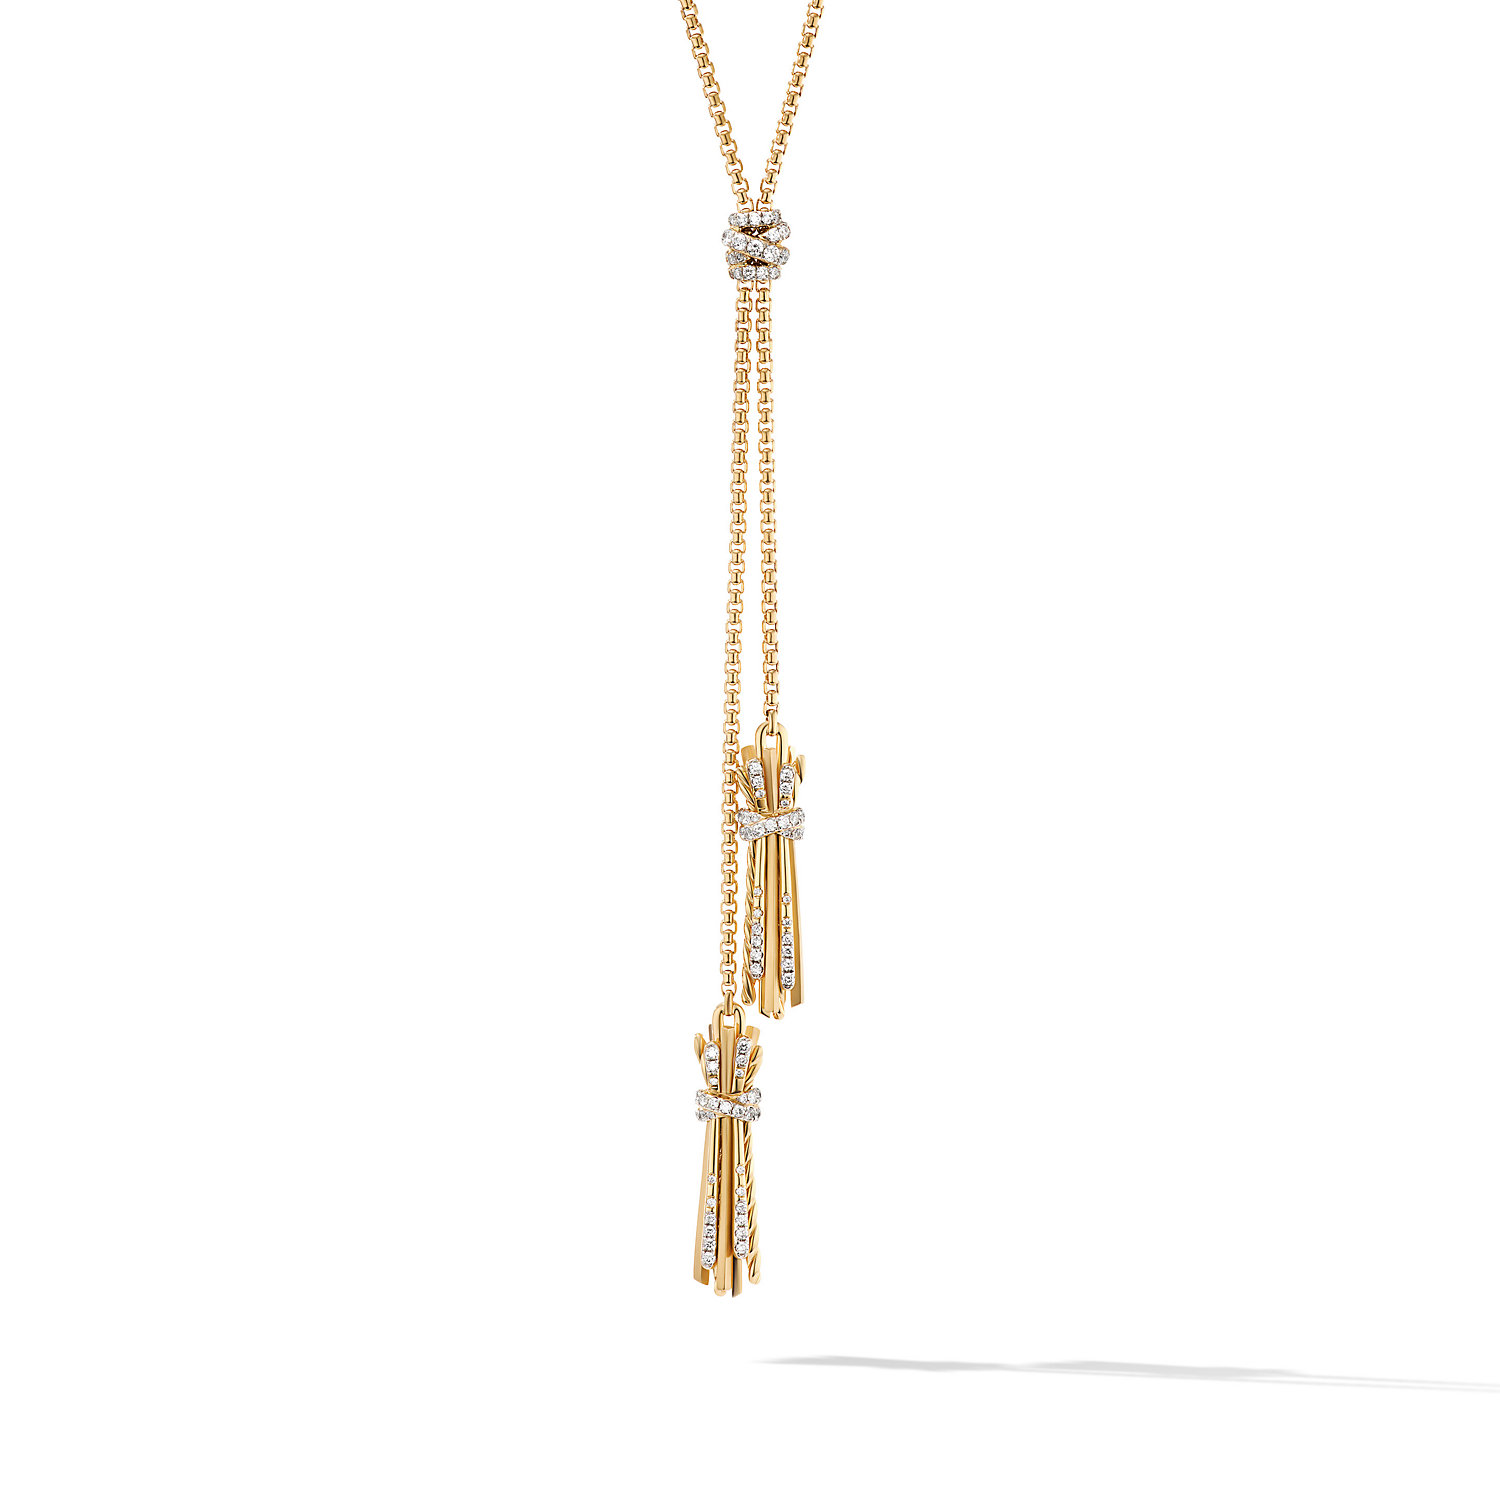 Angelika™ Tassel Necklace in 18K Yellow Gold with Pave Diamonds